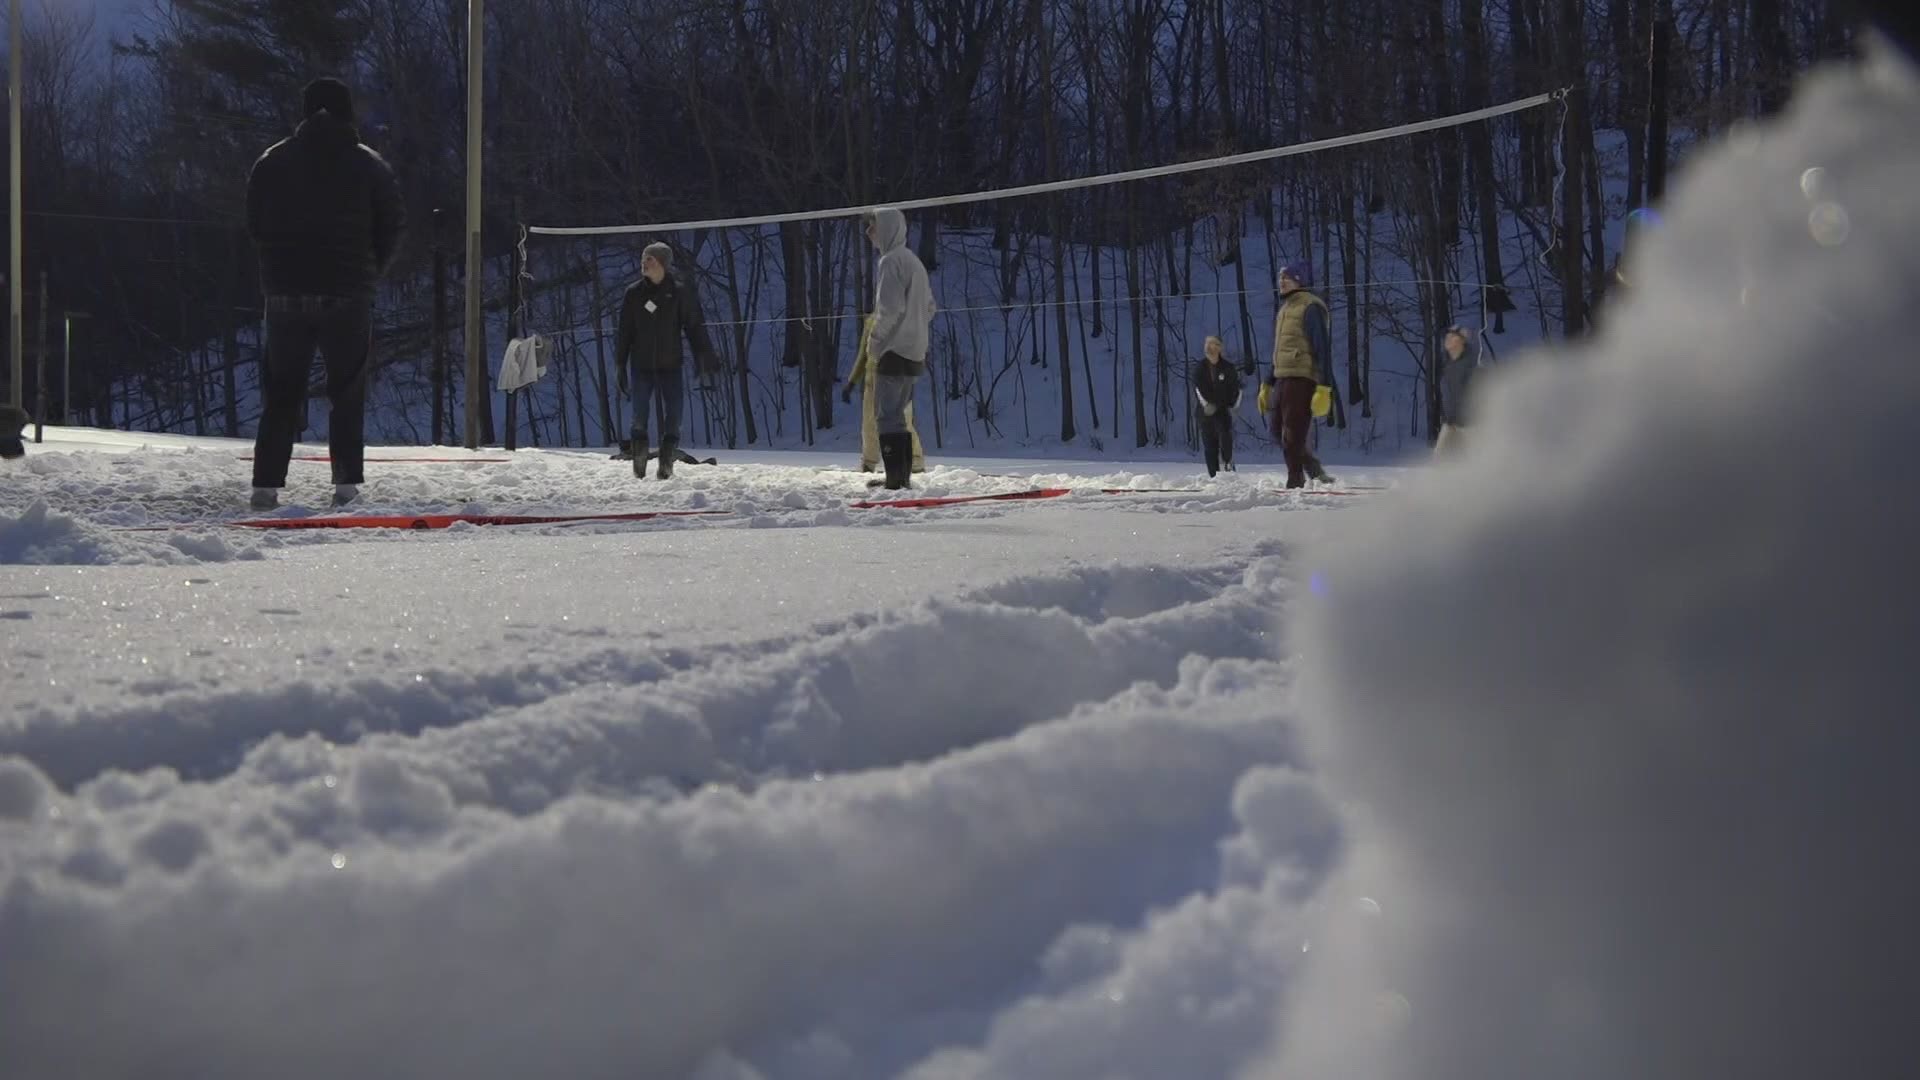 January in Michigan isn't when you'd expect beach volleyball to be happening. But for one lakeshore church group, it's a tradition even snow can't slow down.